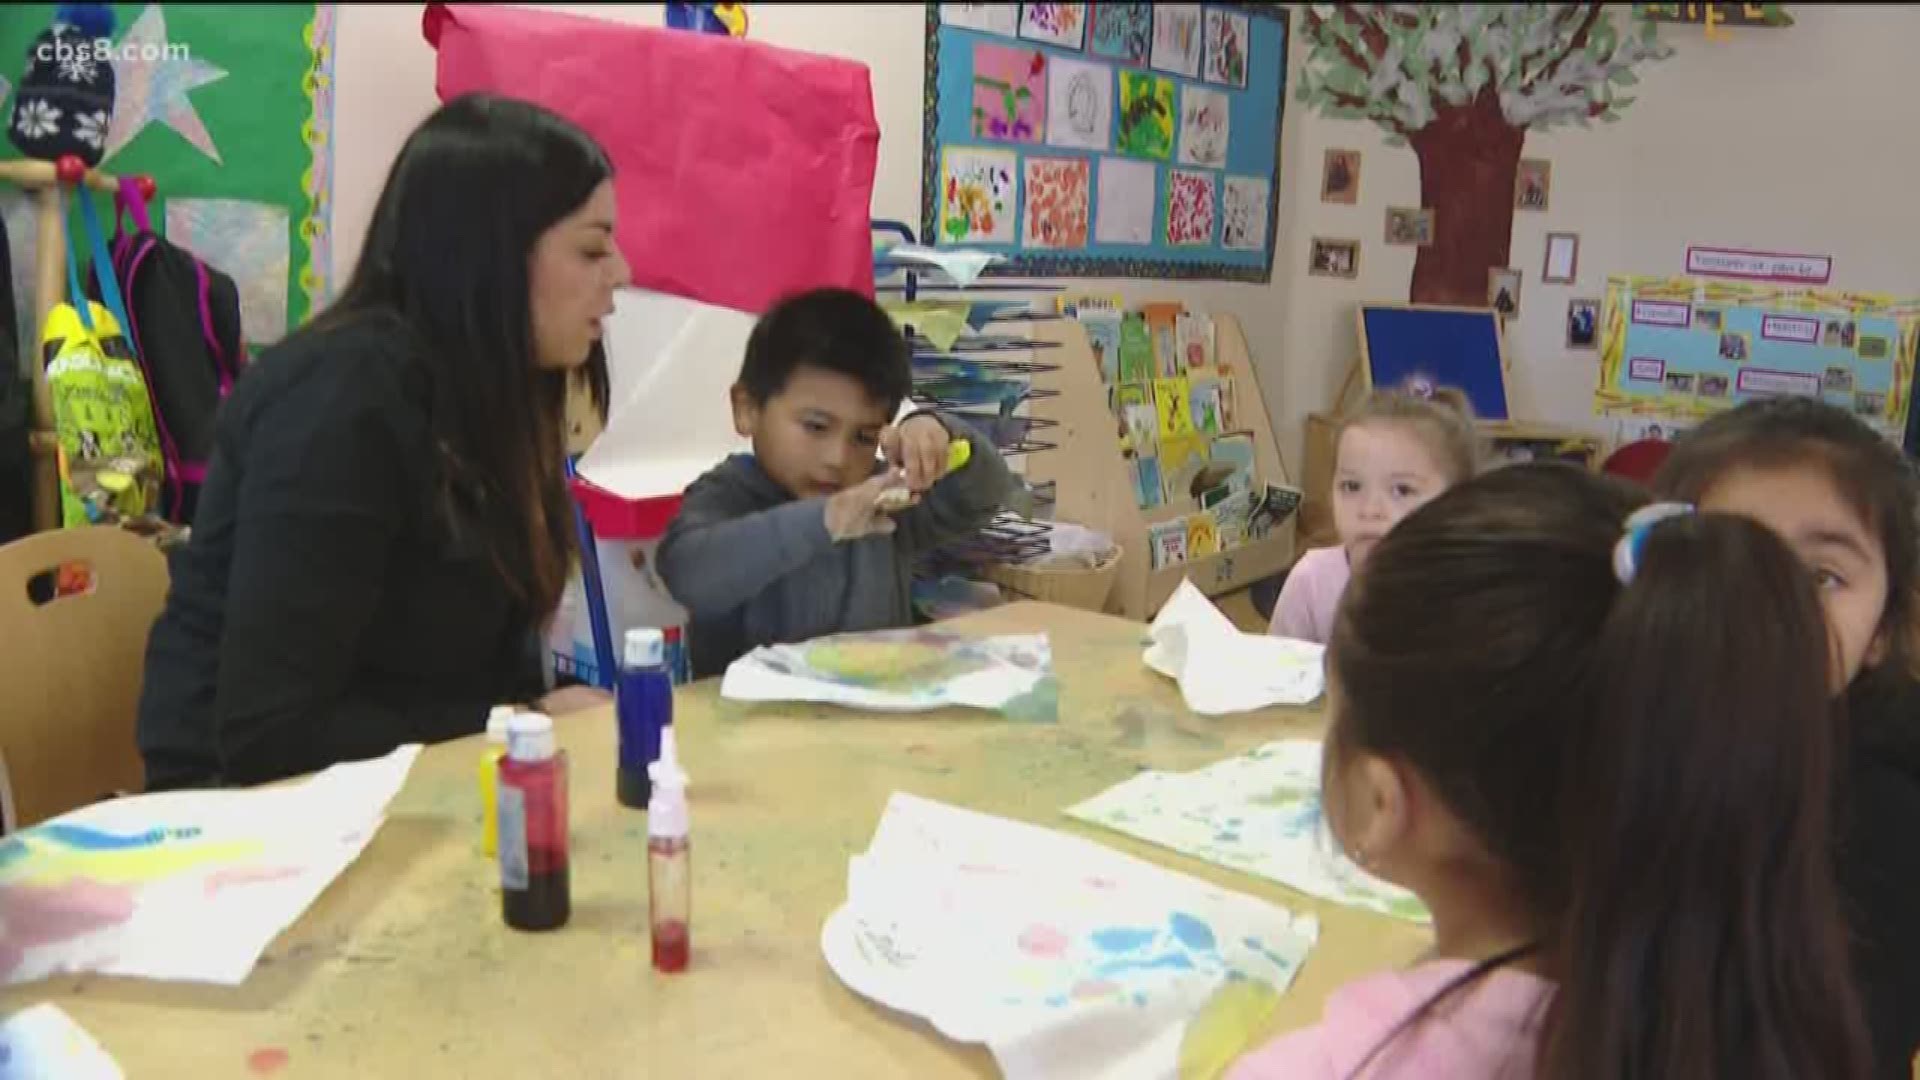 Researchers say it's hard to find affordable child care in San Diego.